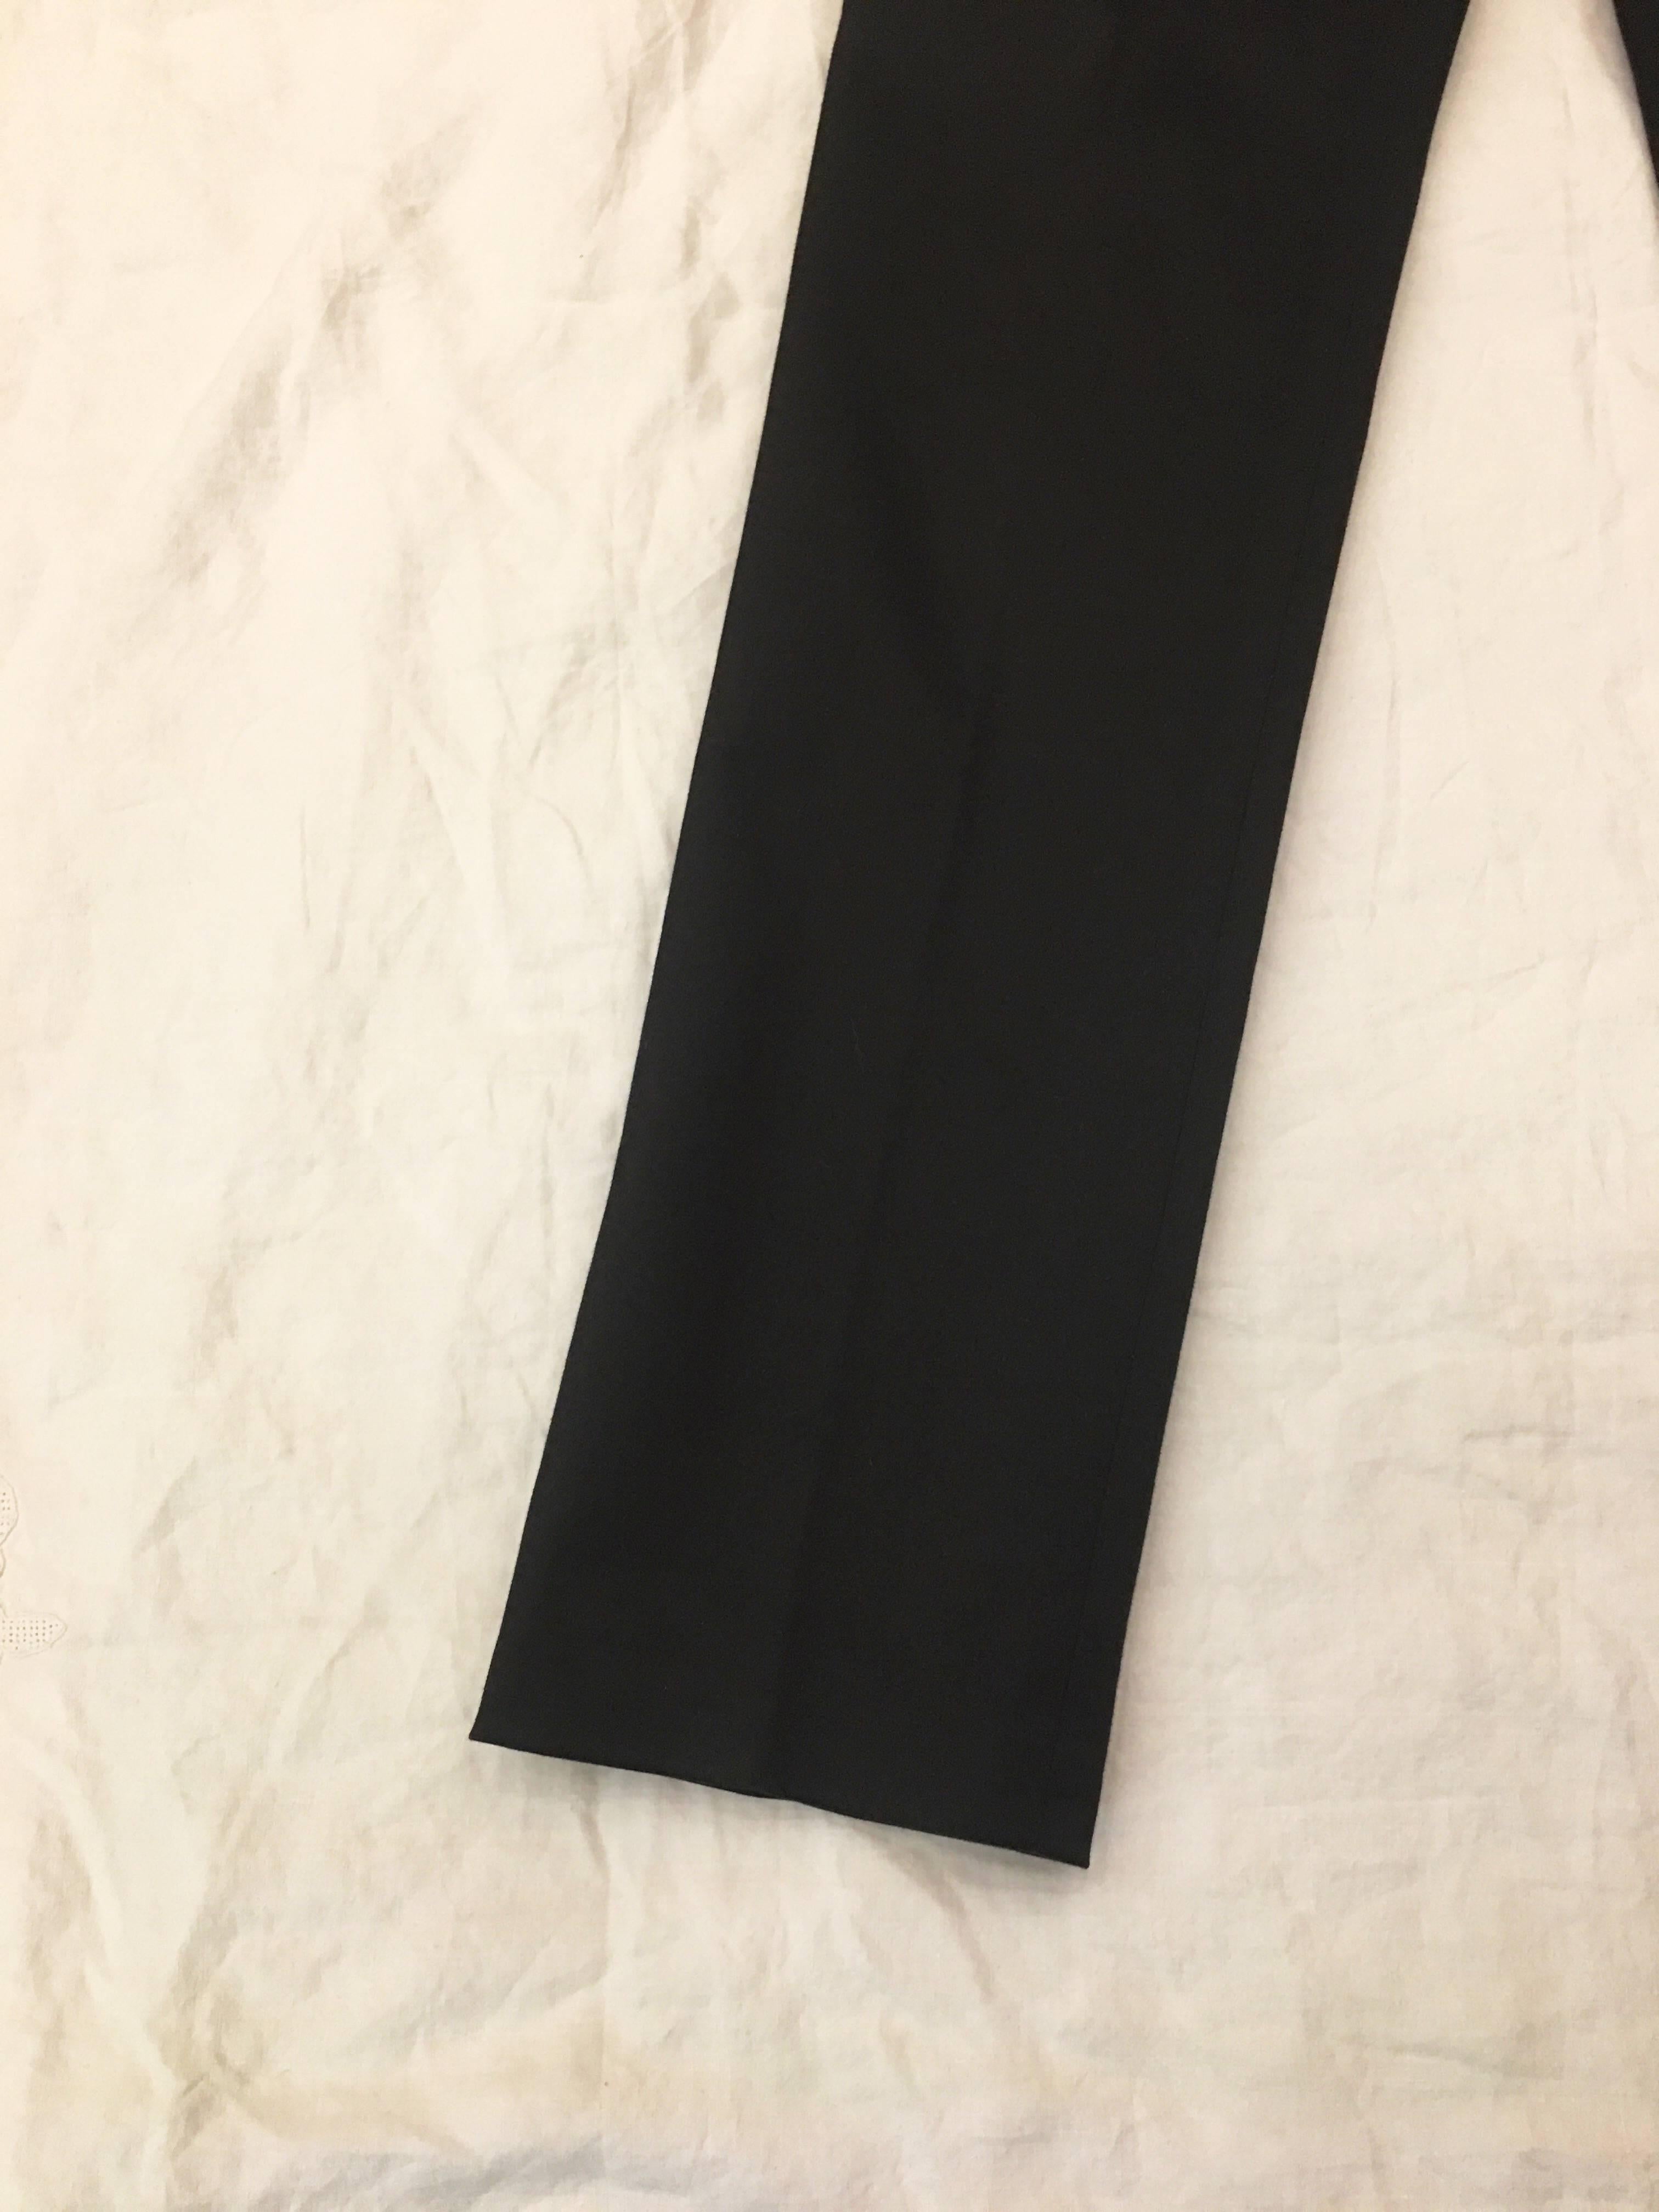 Dolce & Gabbana Black Slim Fit Pants In Excellent Condition For Sale In Brooklyn, NY